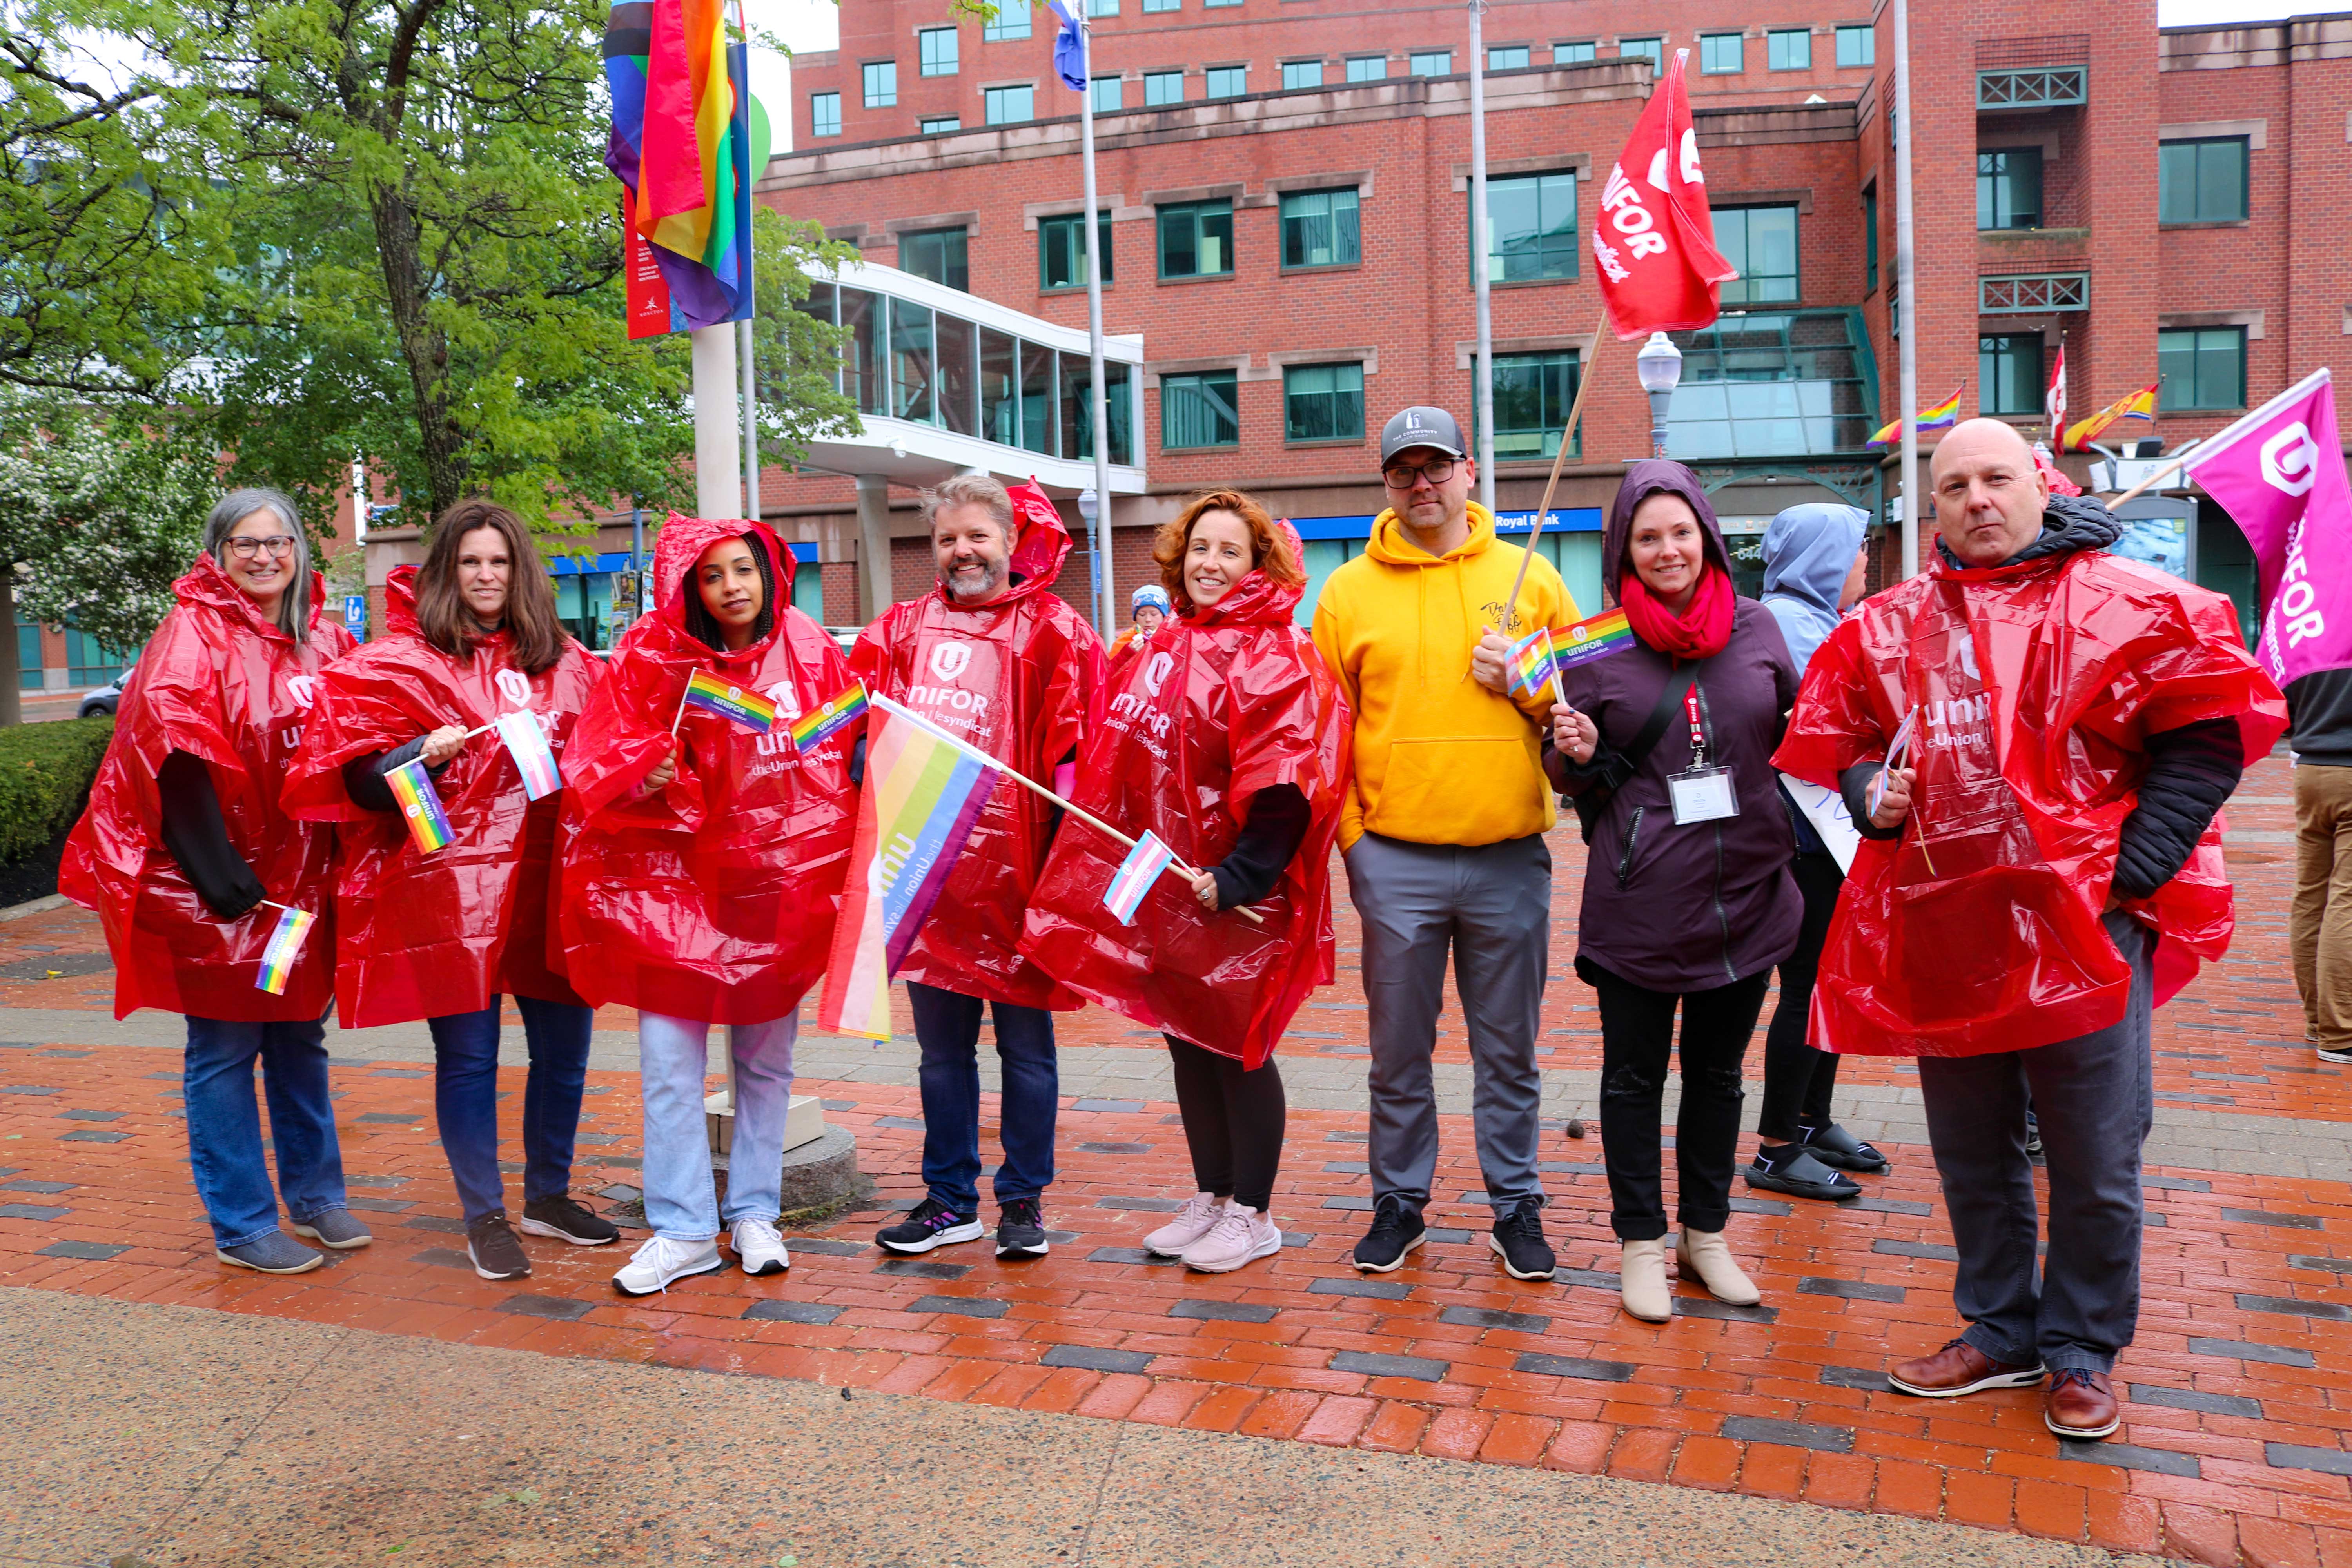 members standing in rain coats with Unifor flags and pride flags.